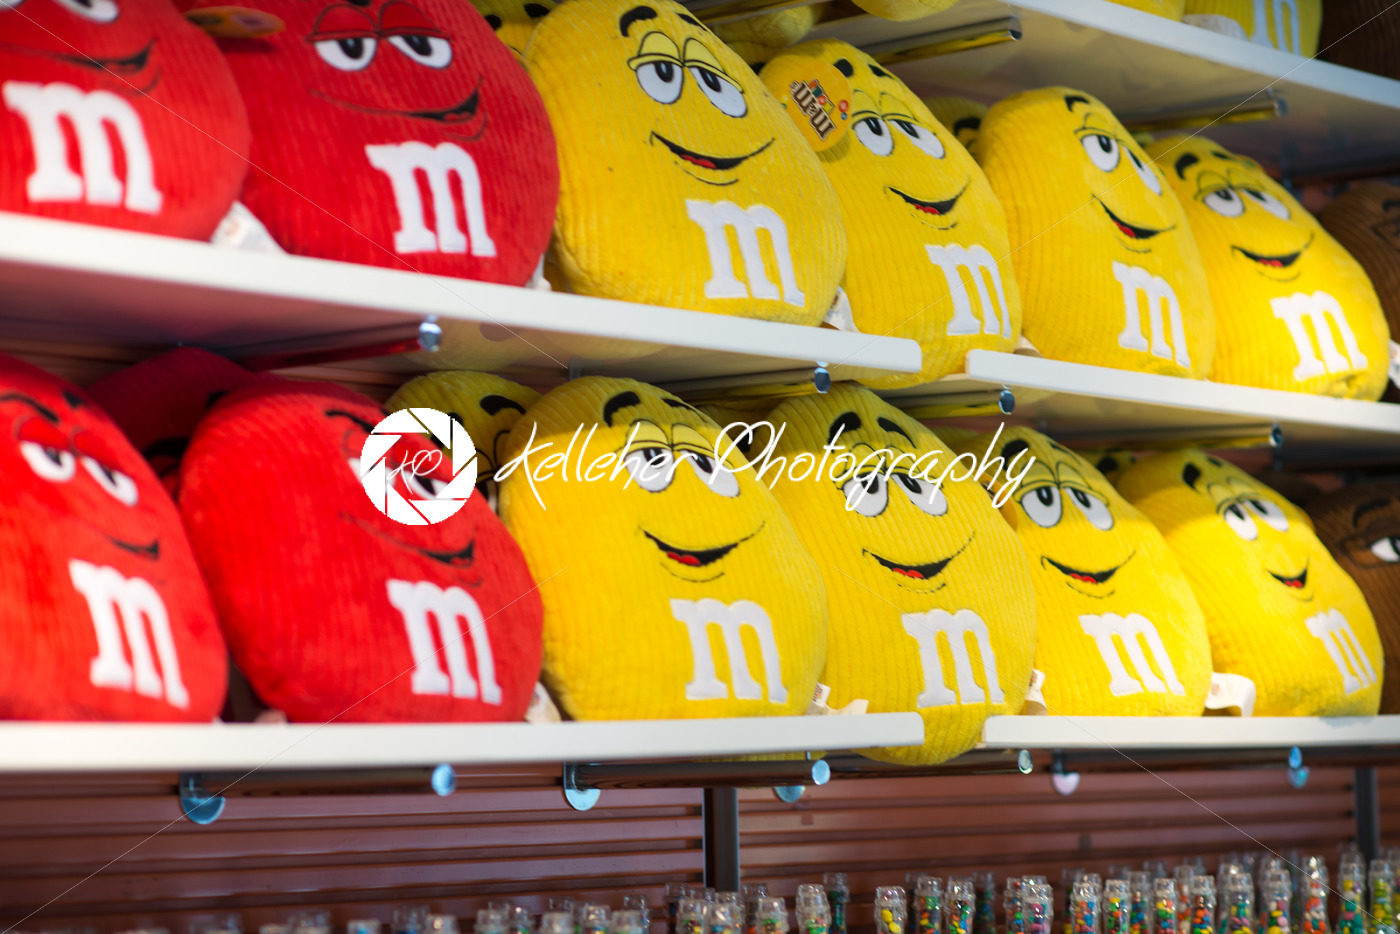 View of Red and Yellow MM pillows in the MM Store located in Times Square, NYC, NY on June 18, 2016 - Kelleher Photography Store